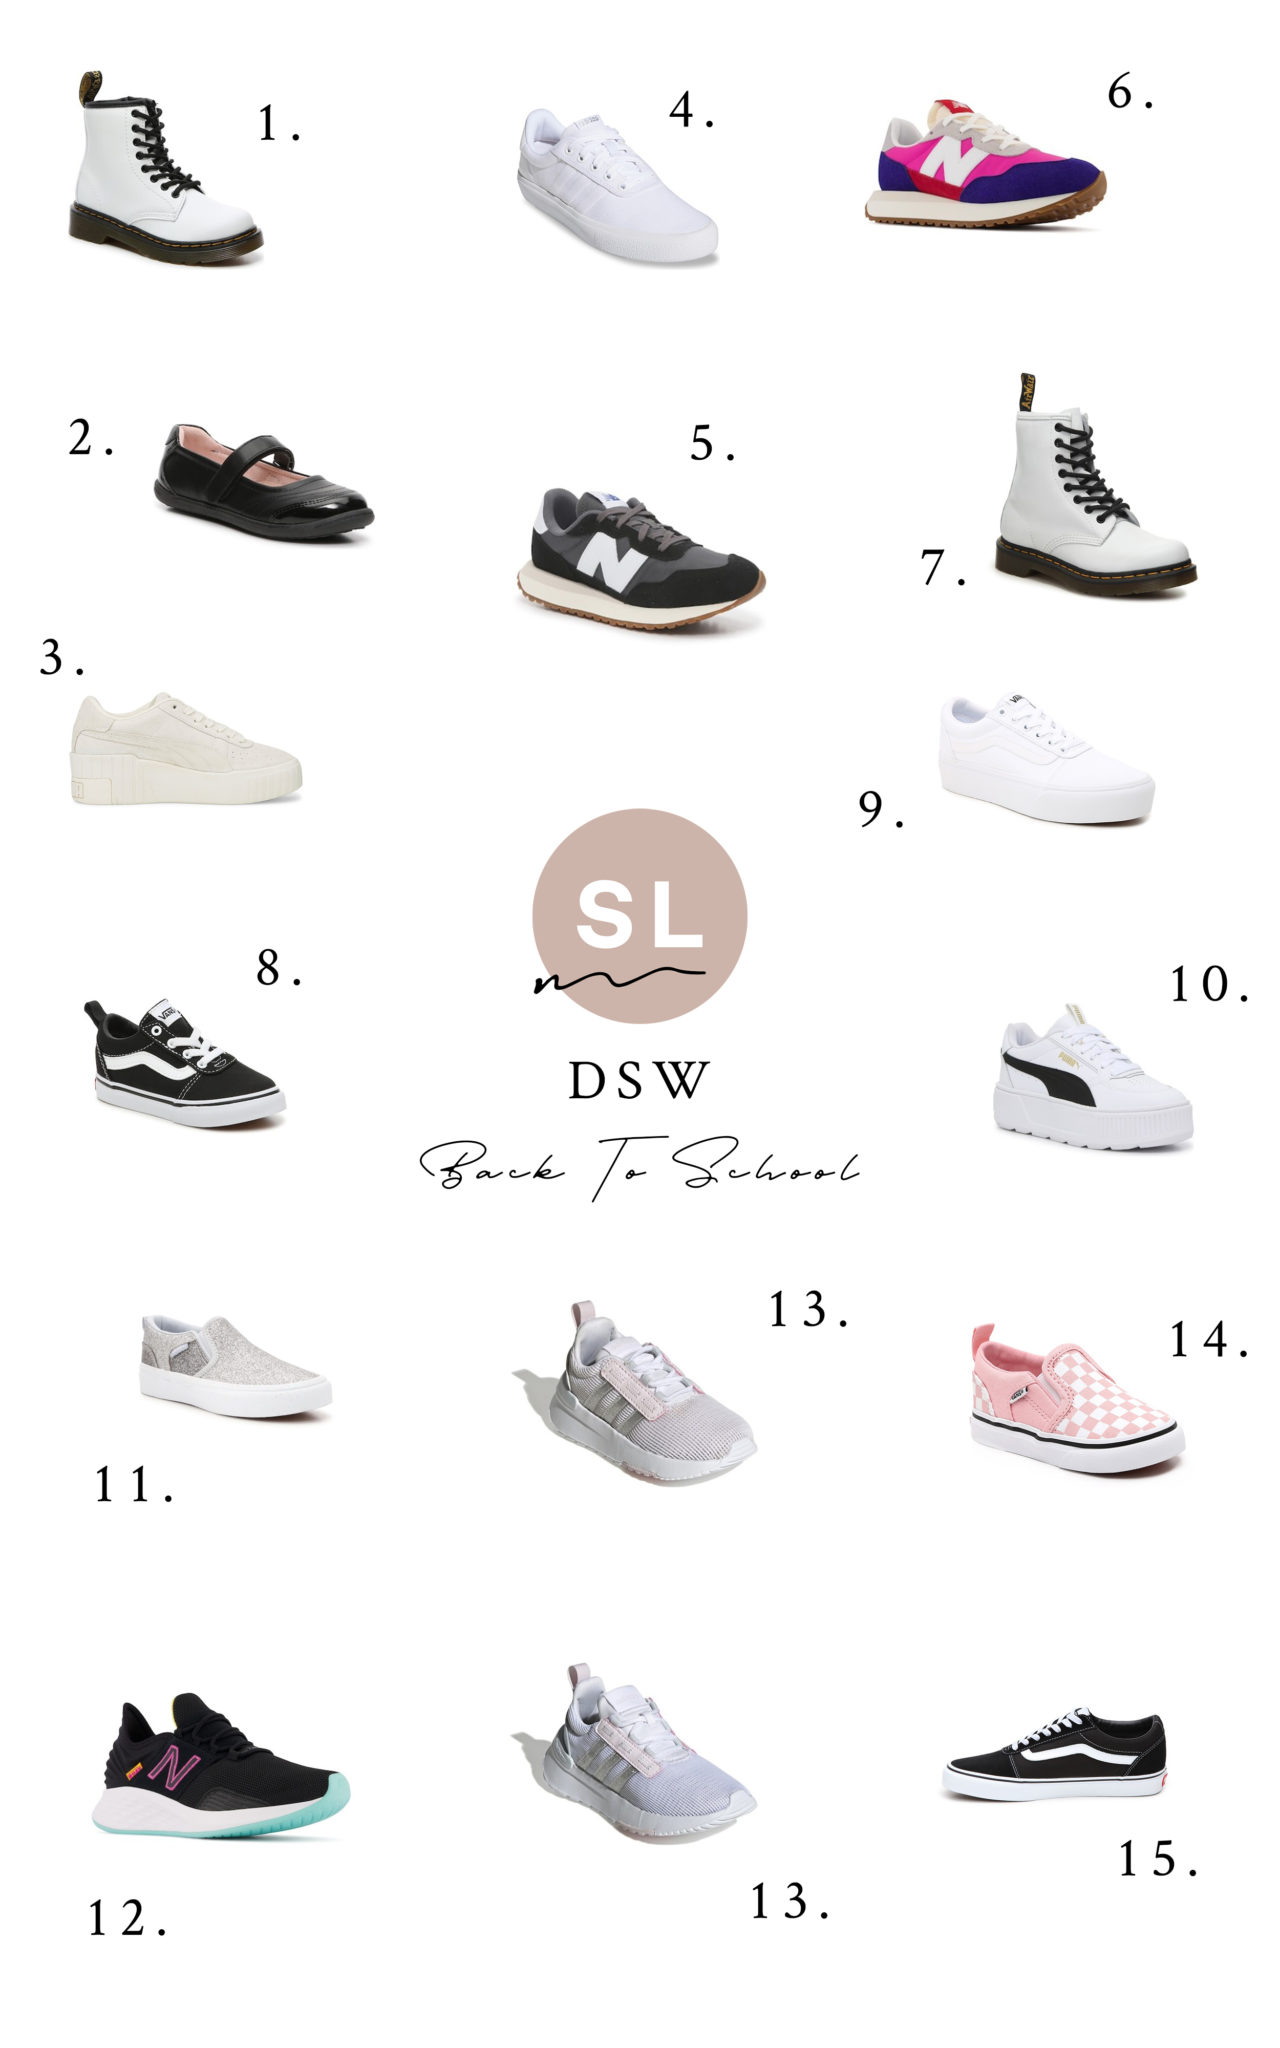 Back To School shoes With DSW